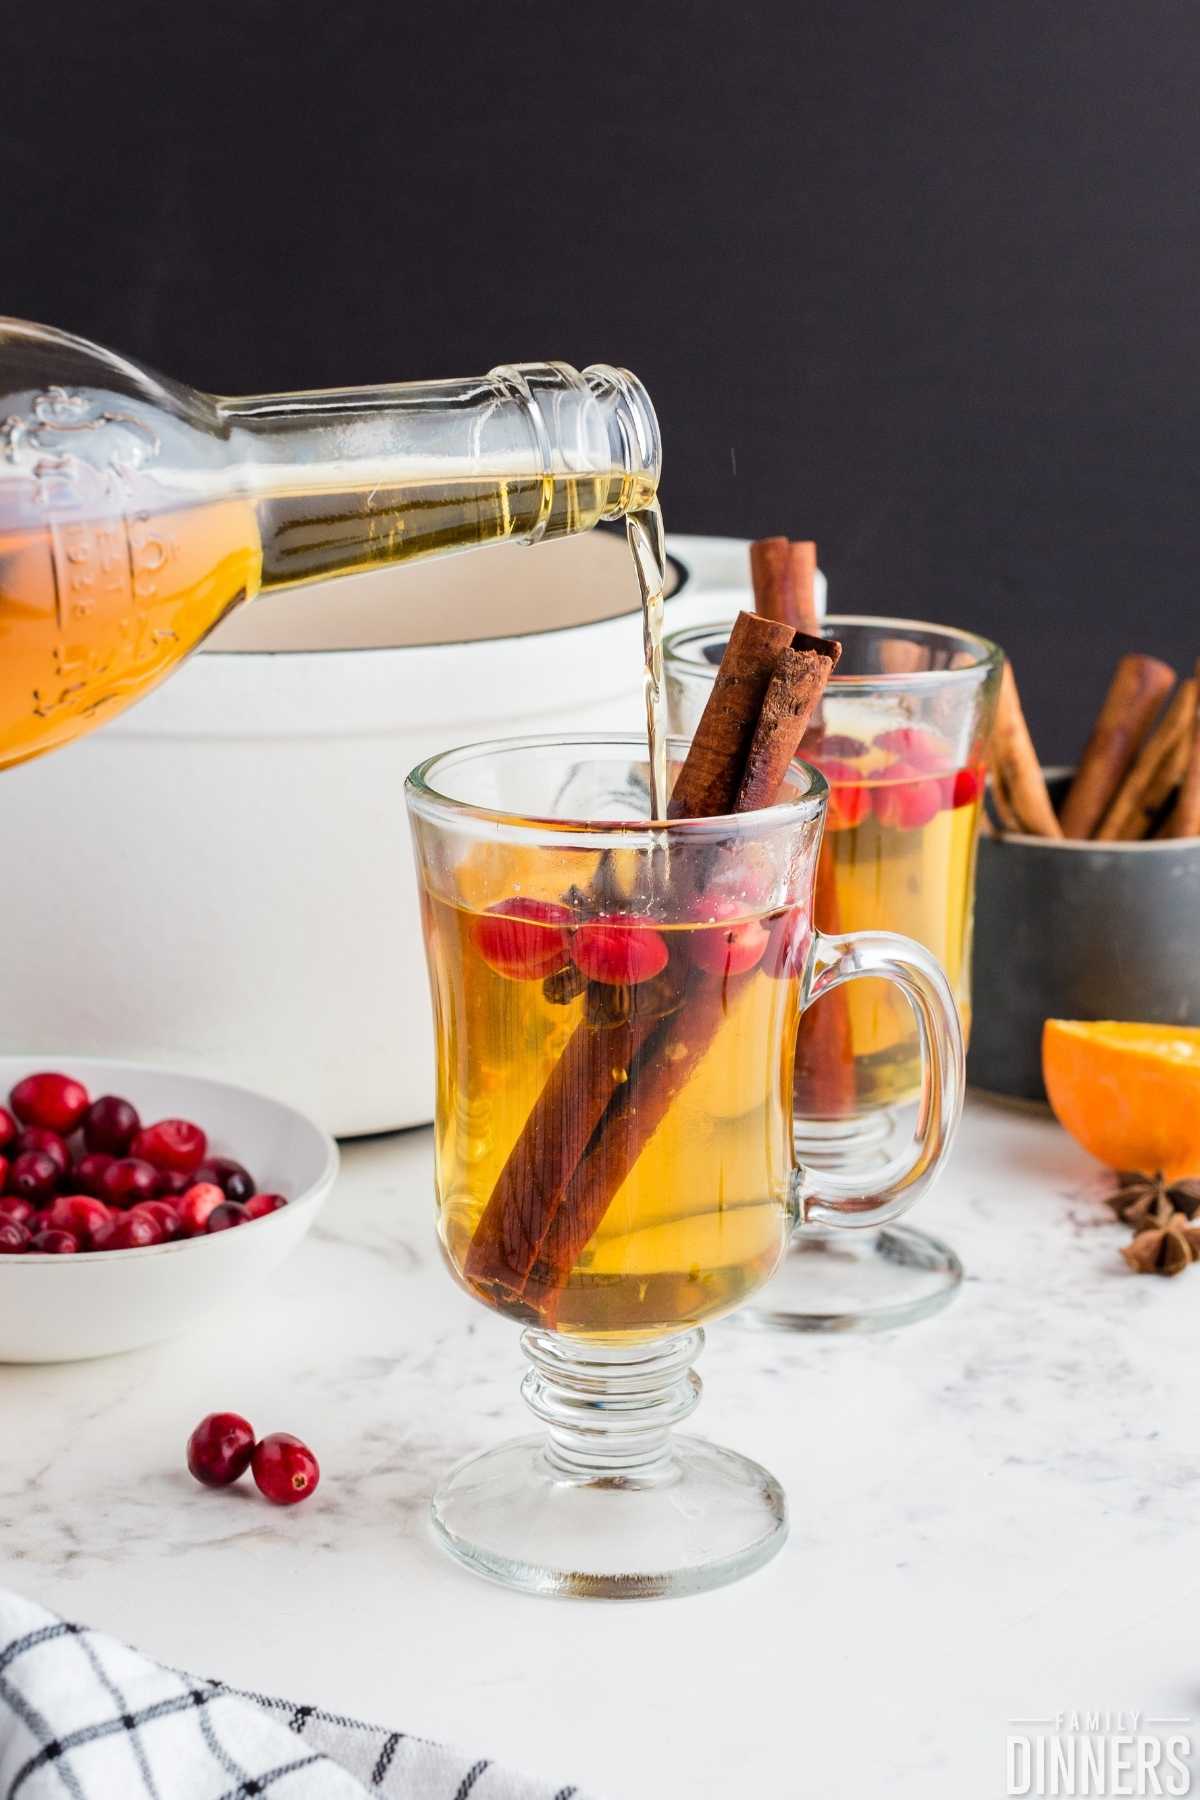 two clear glass mugs filled with golden apple cider cocktail with cranberries, cinnamon sticks in them. Bottle of Tuaca pouring into one mug..